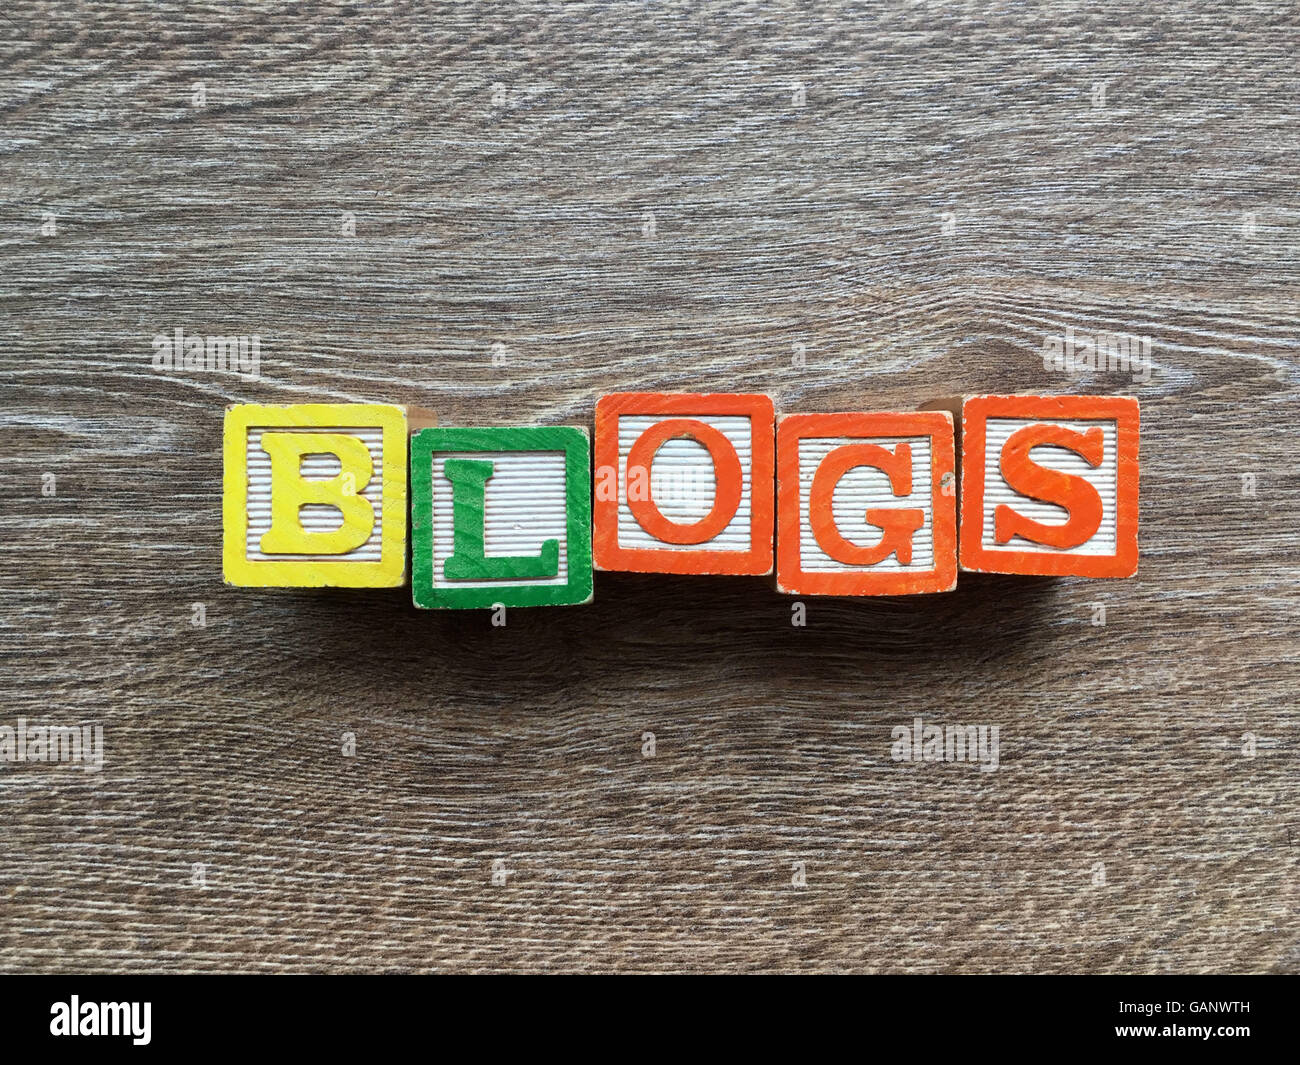 BLOGS word made with toy wood blocks letters Stock Photo